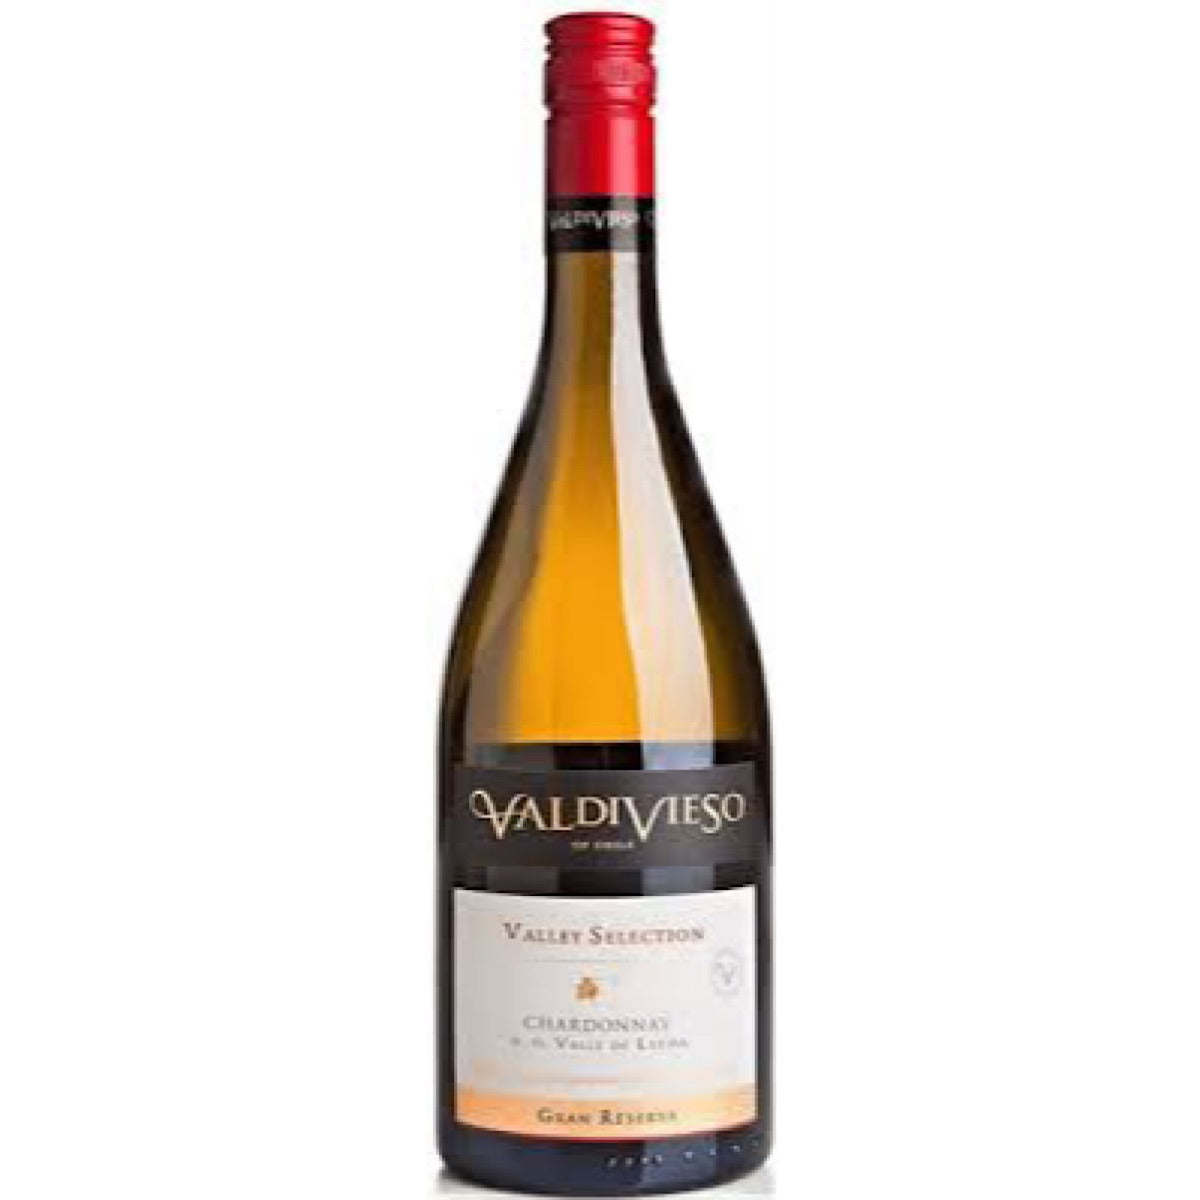 Valdivieso Valley Selection Chardonnay 6 Bottle Case 75cl